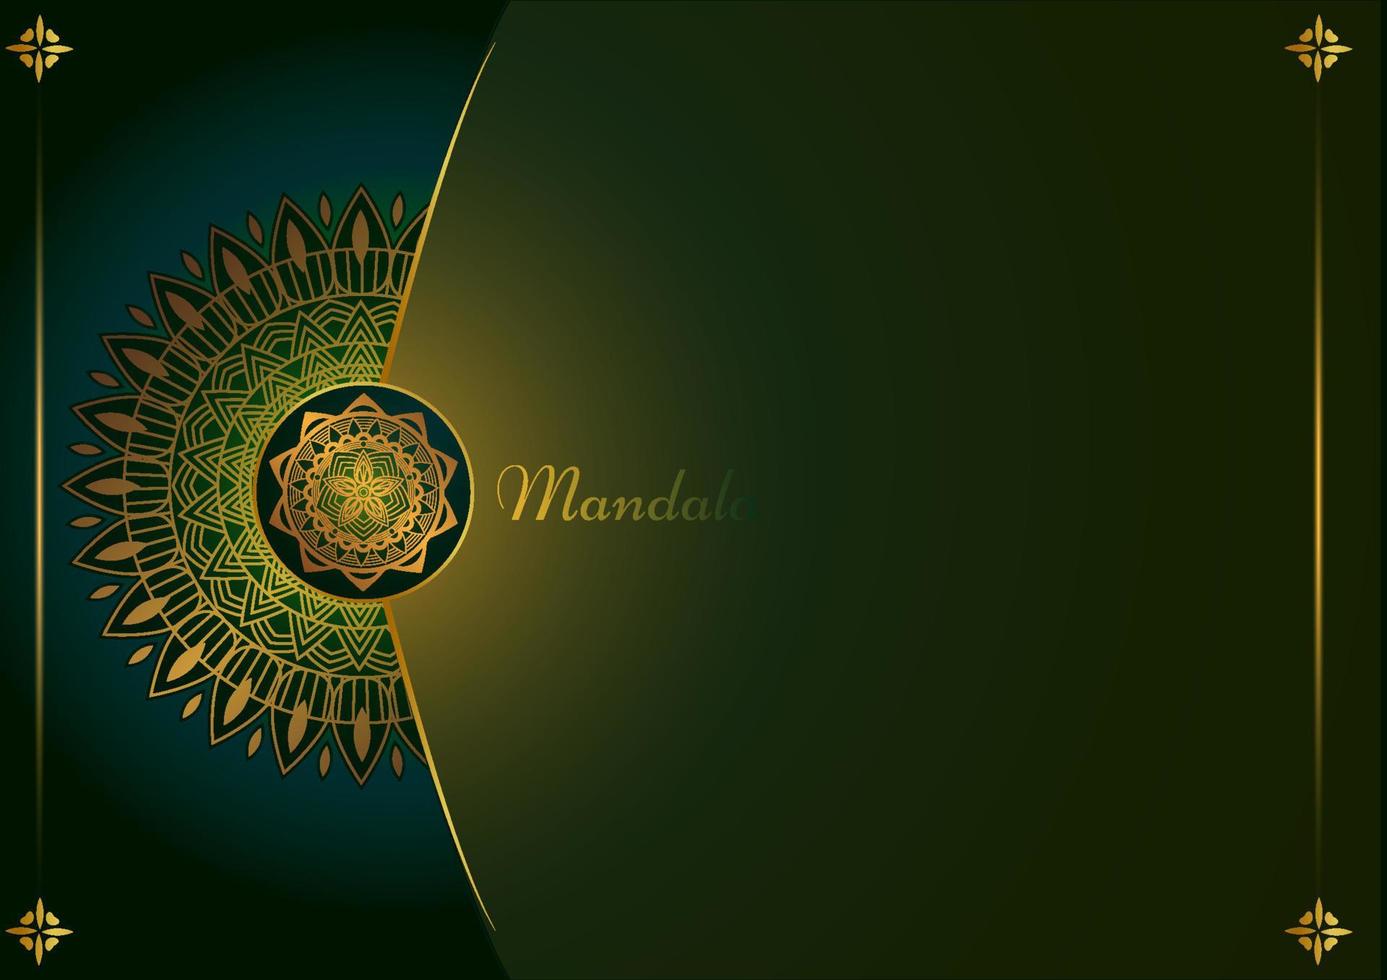 Art of traditional Indian geometric. Luxury mandala graphic background. Gold, dark green, black ornamental on shadow transparency. Decorative pattern east style. Vector illustration with copy space.